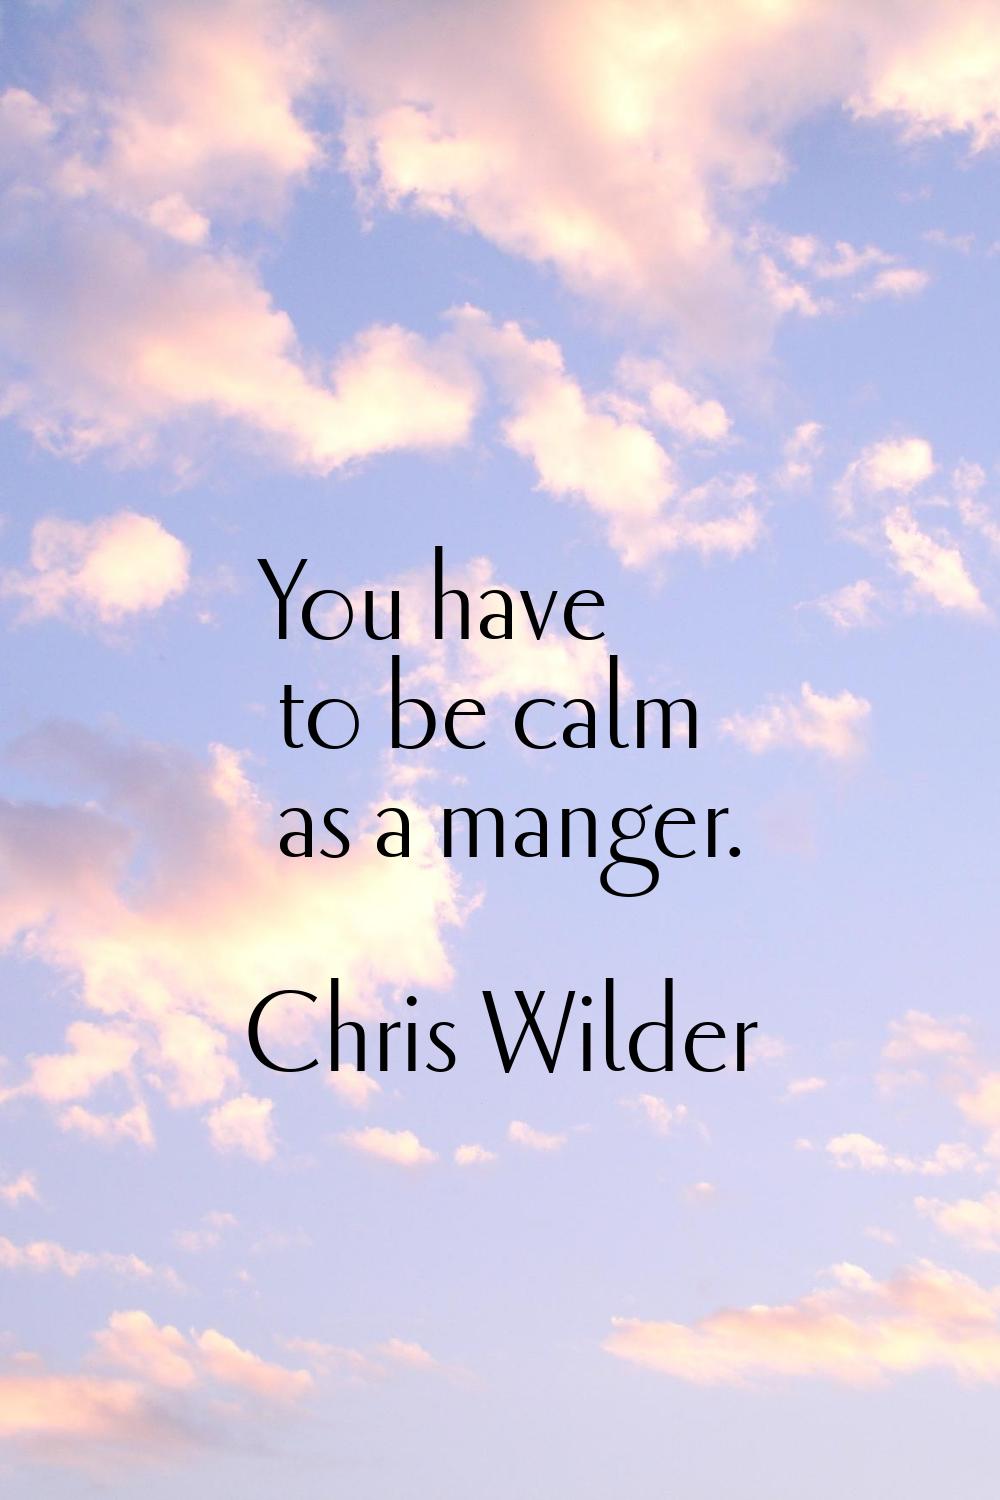 You have to be calm as a manger.